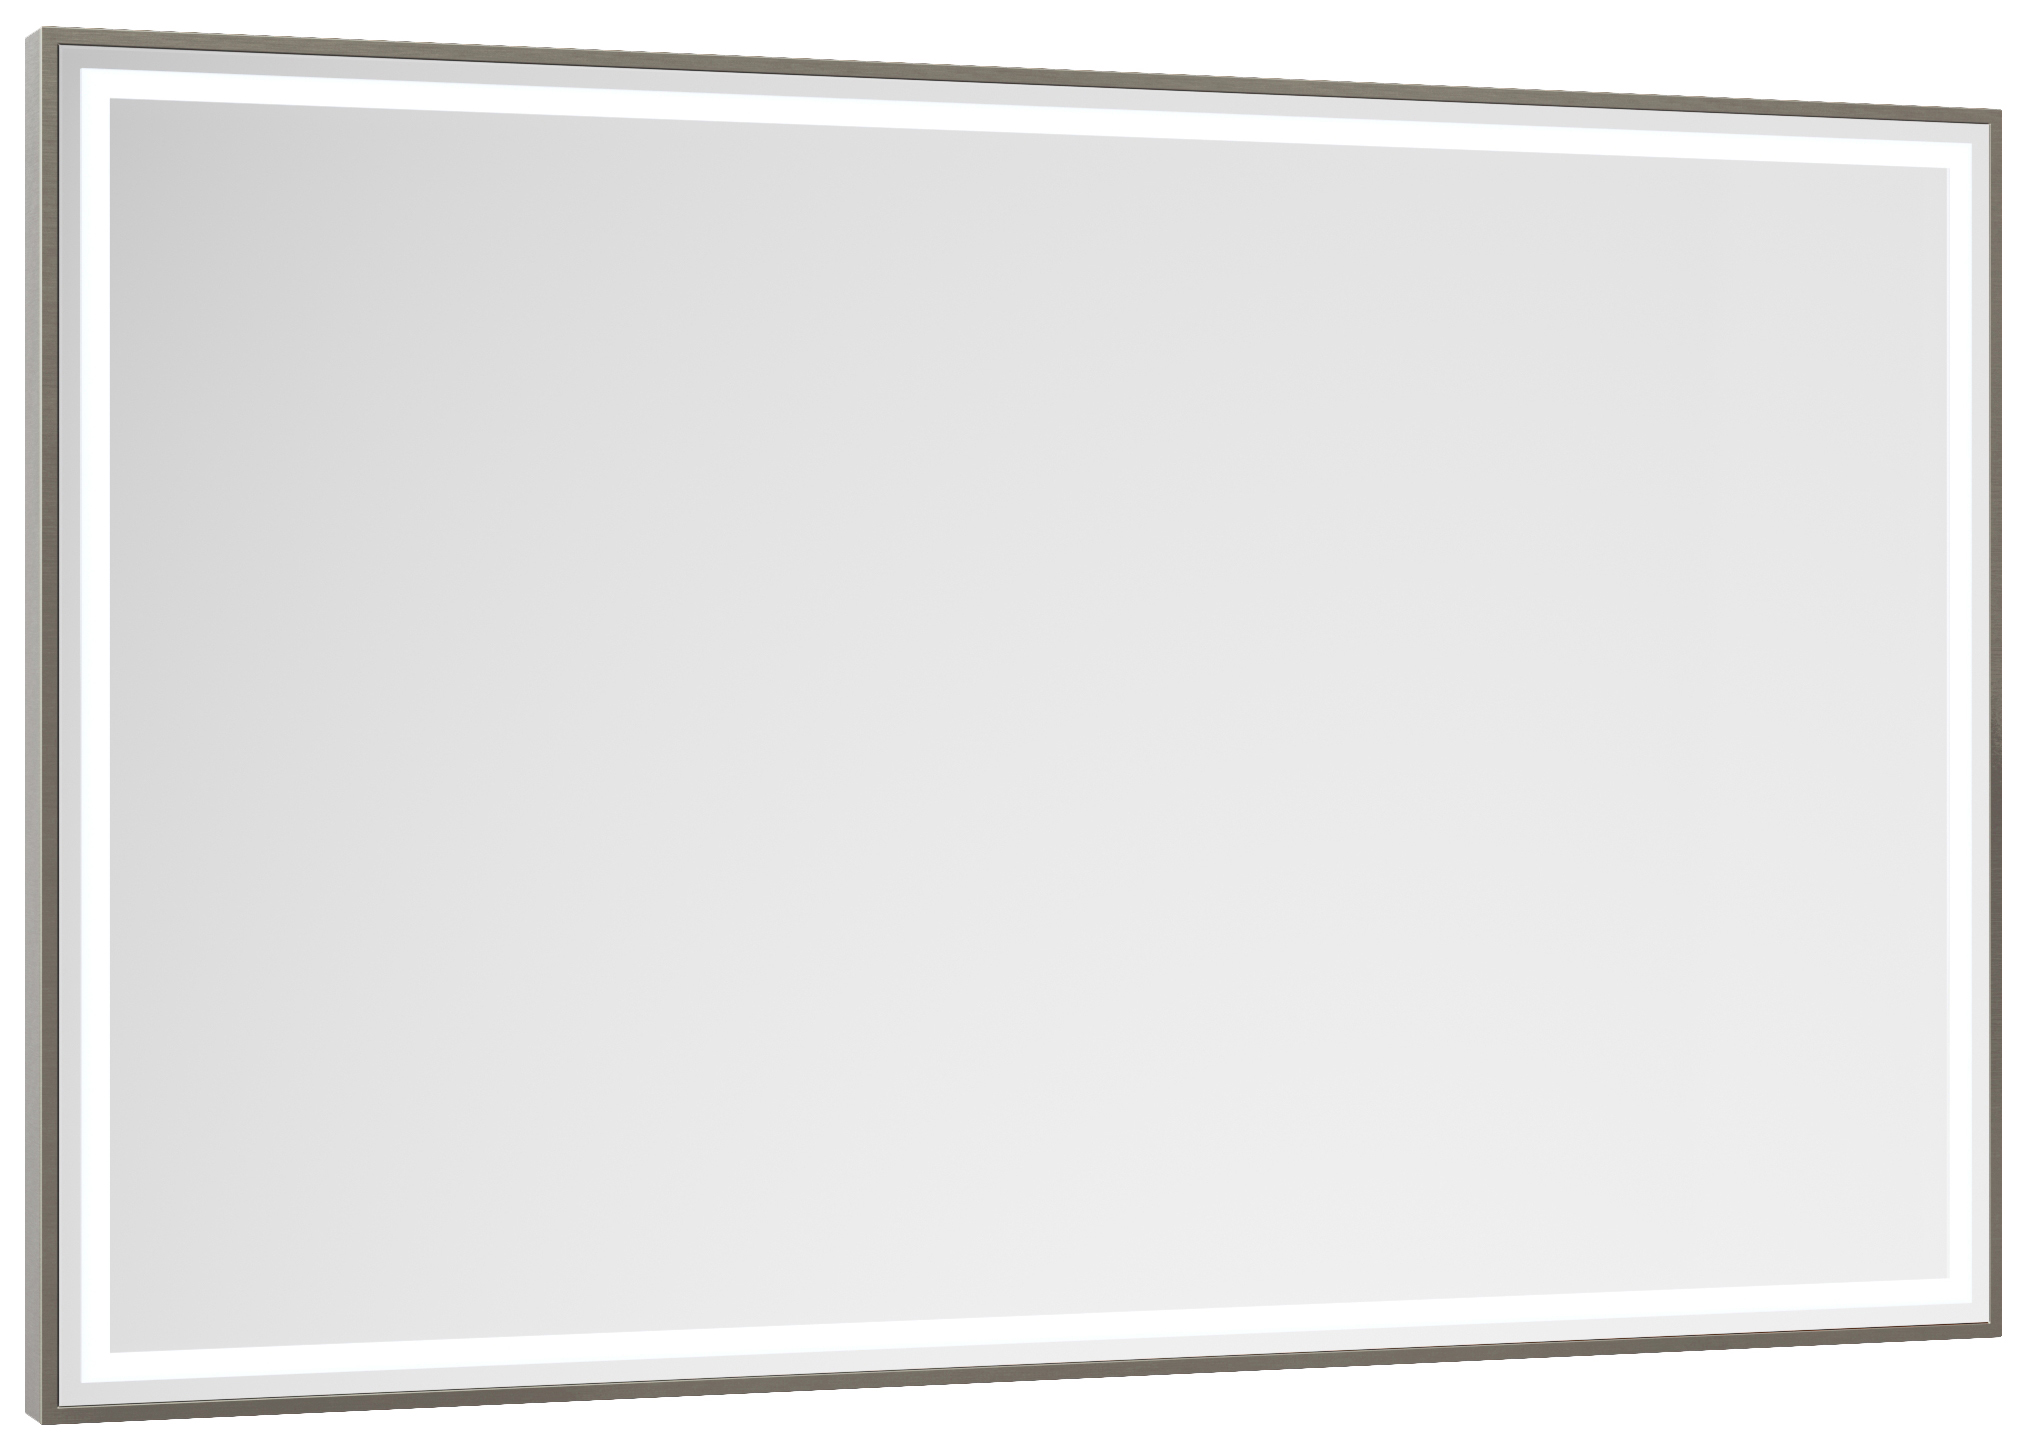 Abacus Melford Silver LED Mirror with Demister - 1200 x 600mm